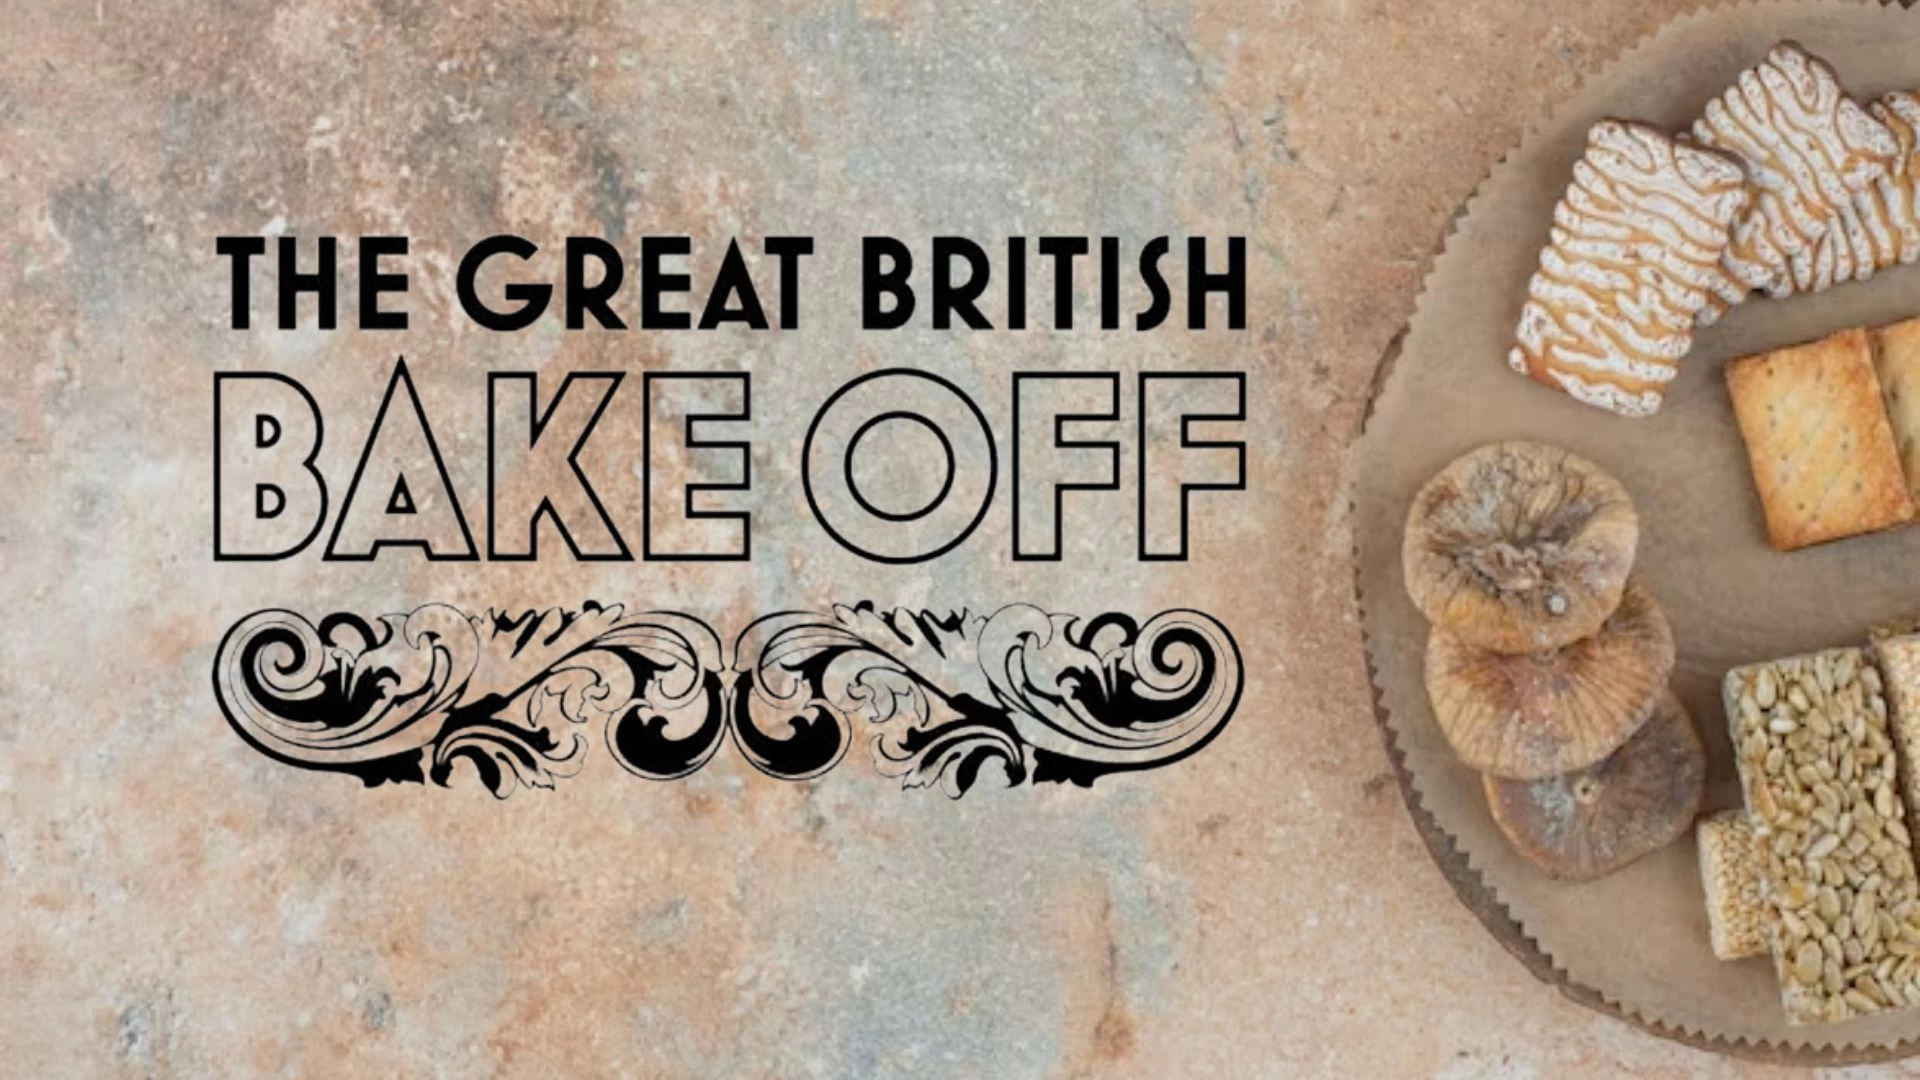 Who Left Bake Off Last Night? The Great British Bake Off Series 14 Contenstants List